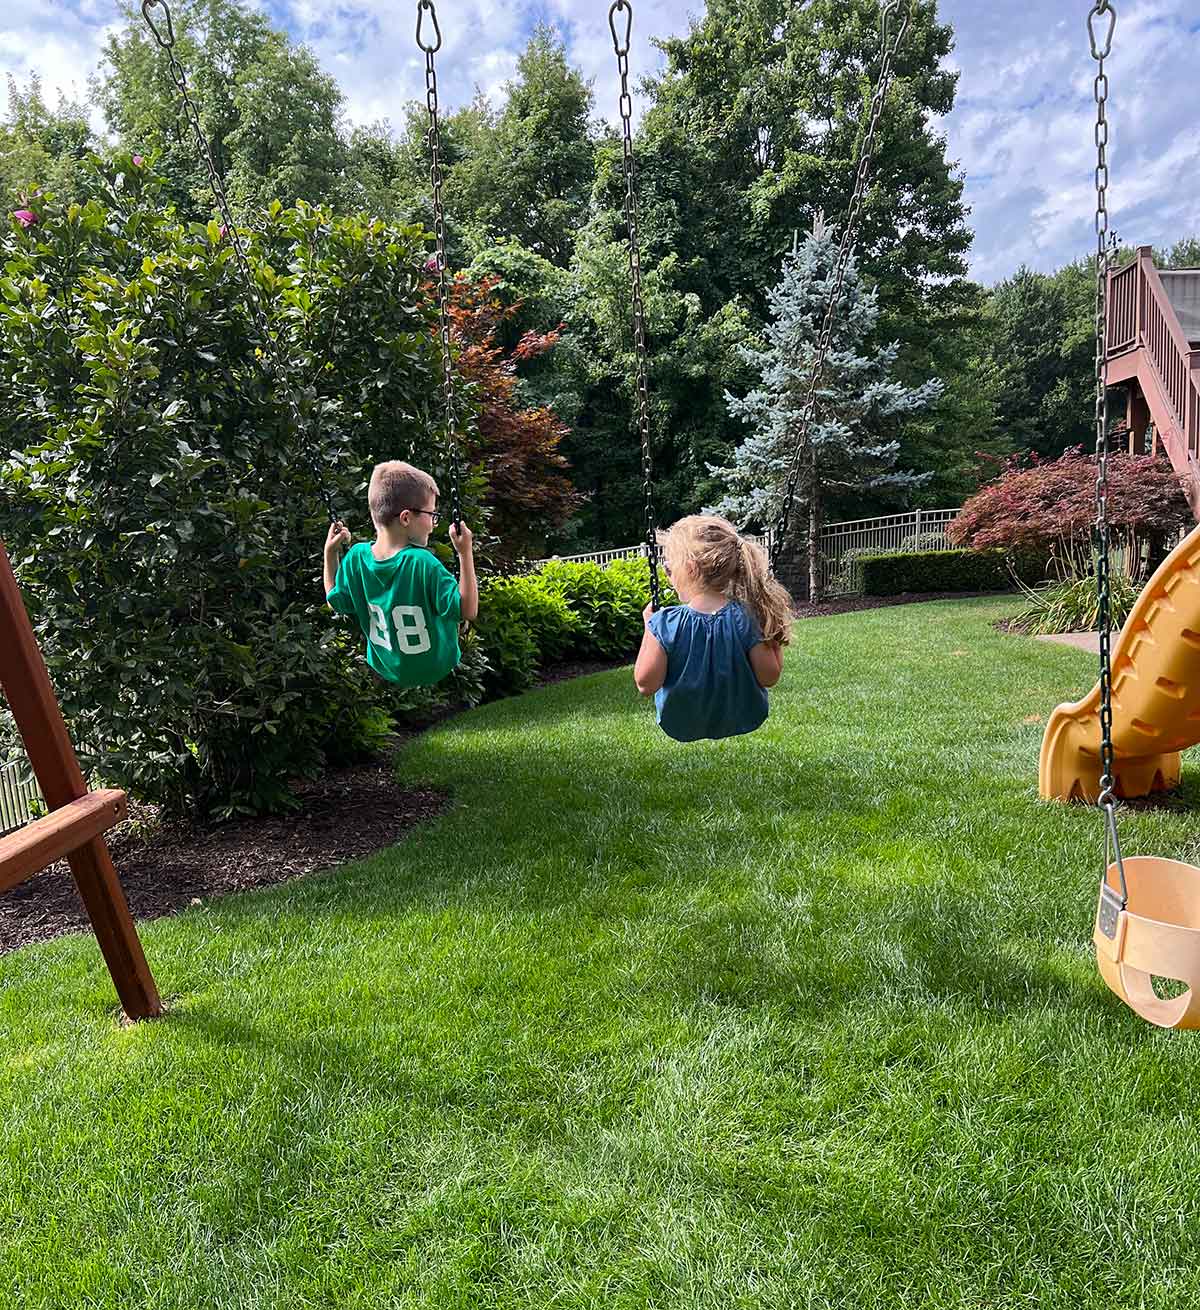 Girl and boy swinging on swings in a backyard with trees in the background.